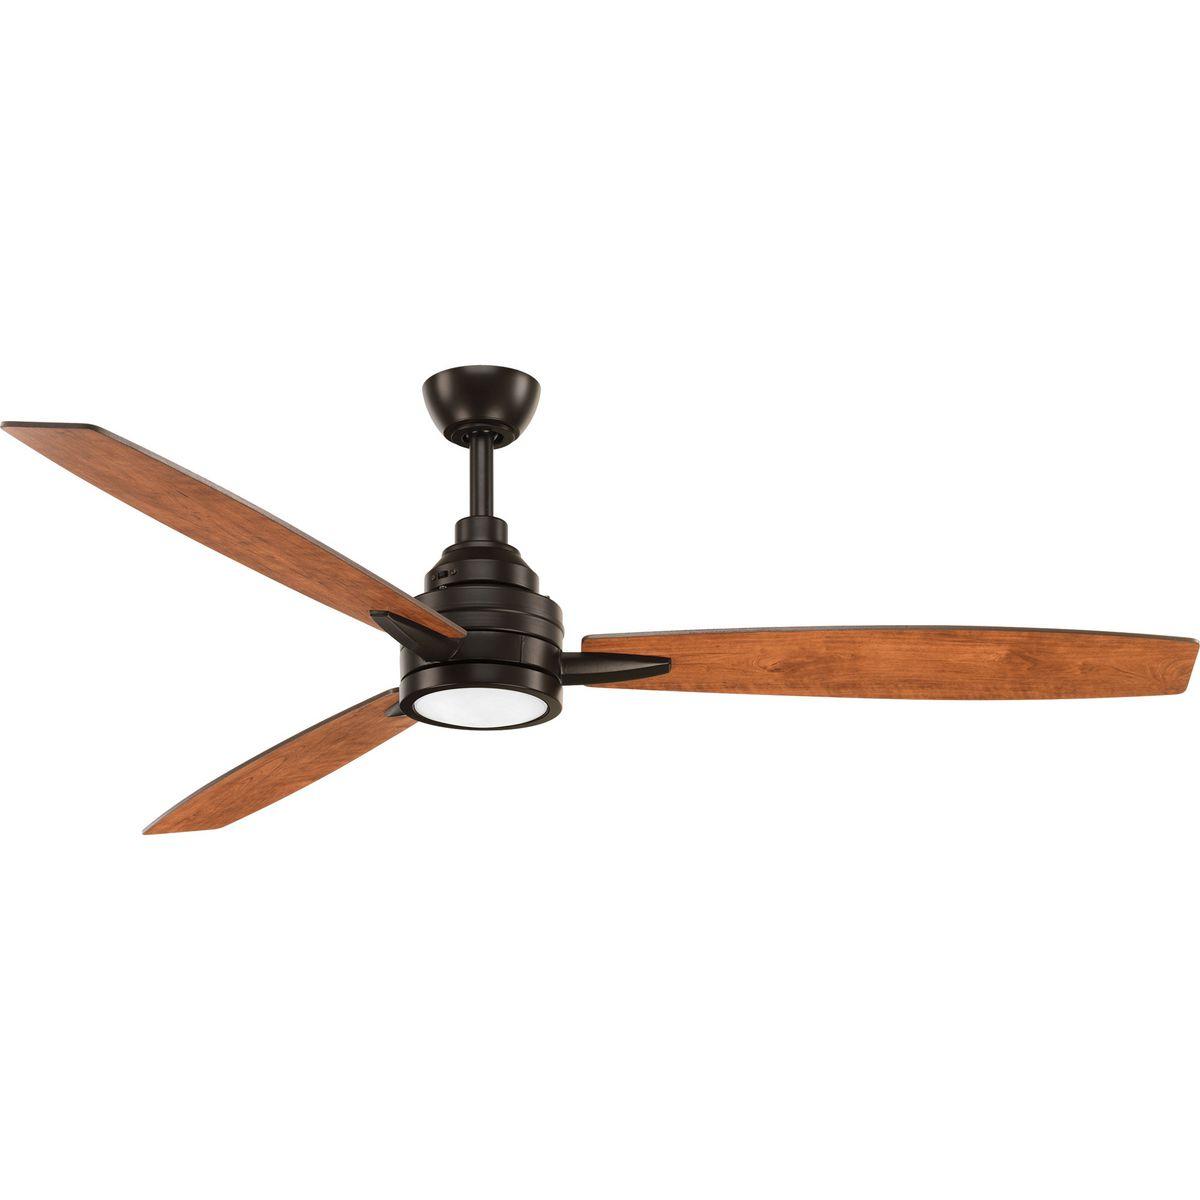 Hubbell P2554-2030K Three-blade 60 inch Gaze ceiling fan features an LED light source, offering both form and function with energy- and cost-savings benefits. An opal white shade contains an 18W dimmable, 3000K LED module. Full range dimming and remote control with batteries